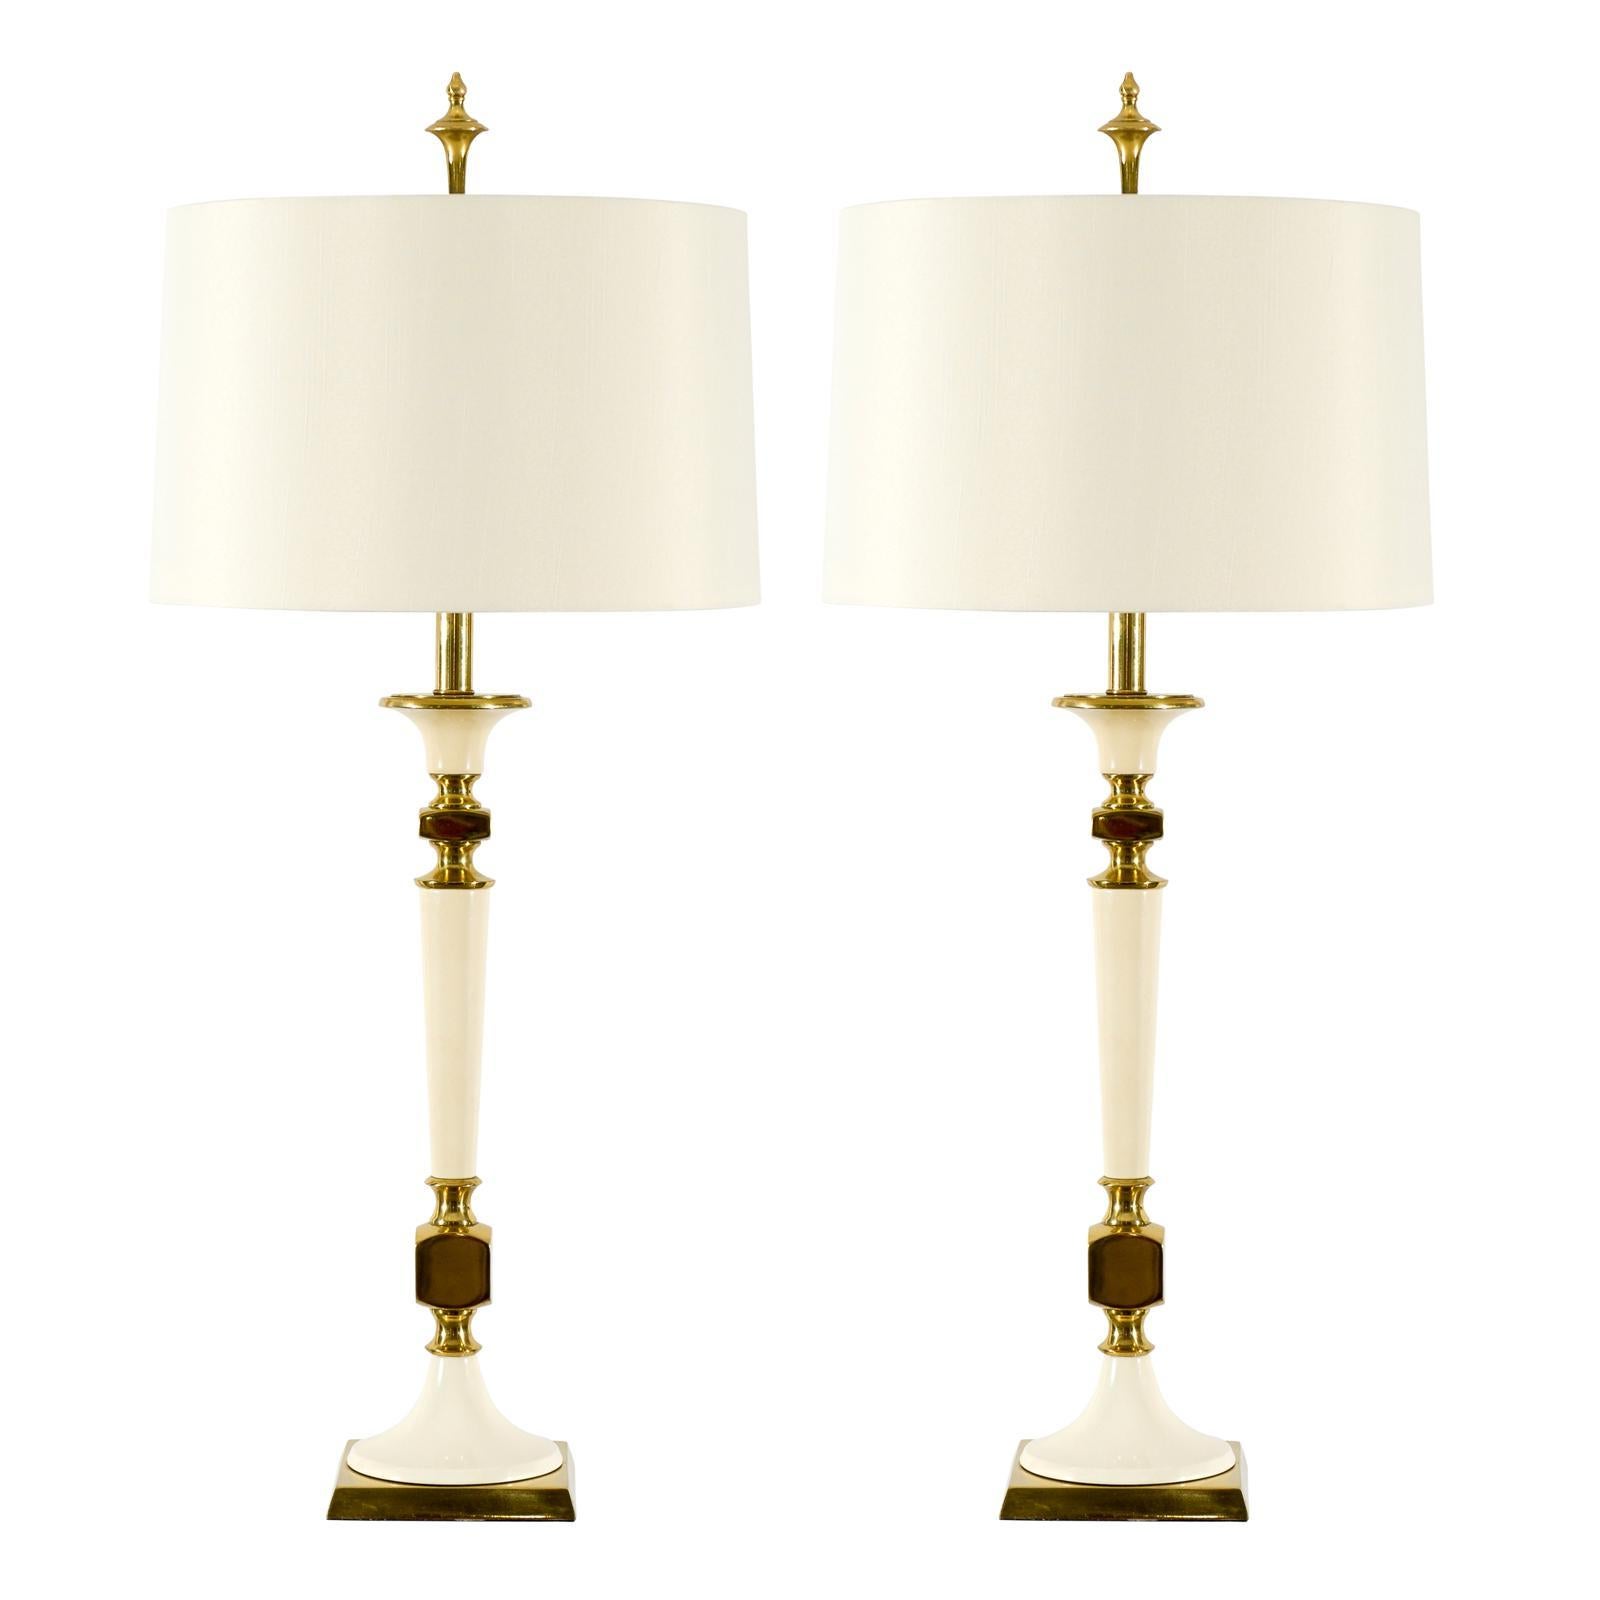 Gorgeous Pair of Stiffel Lamps in Brass and Cream